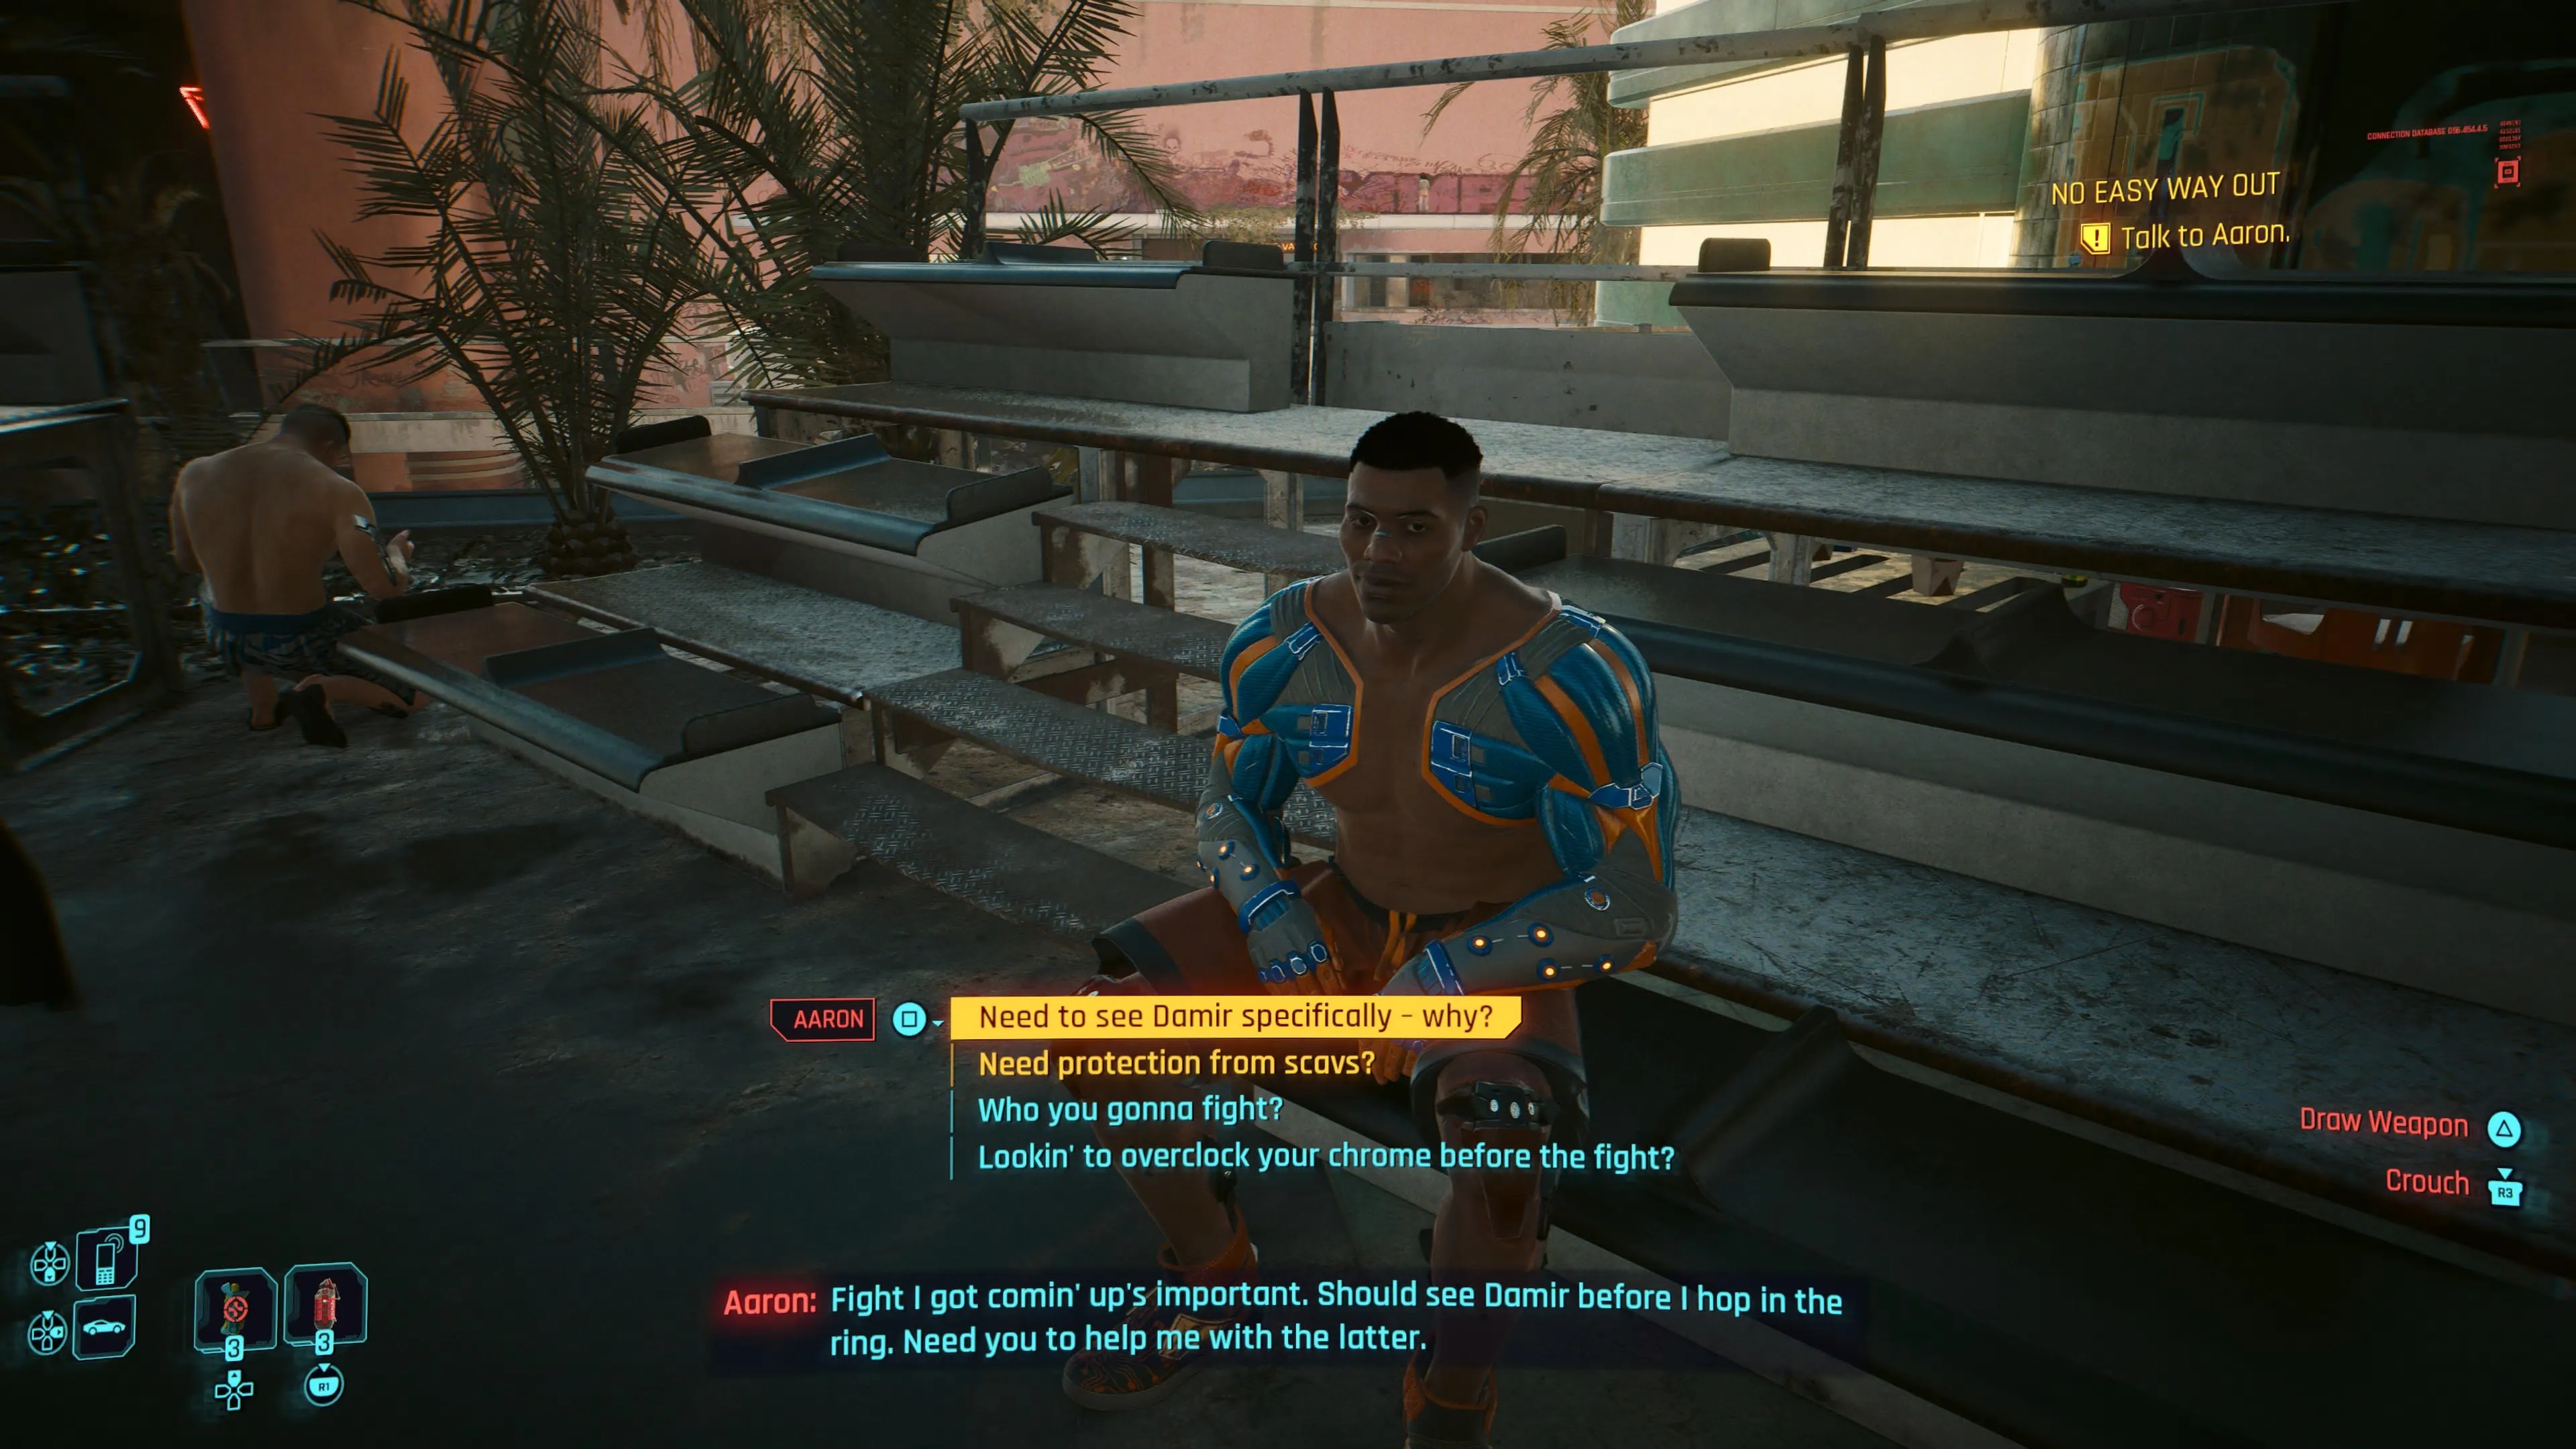 An in game screenshot of the character Aaron from the game Cyberpunk 2077.